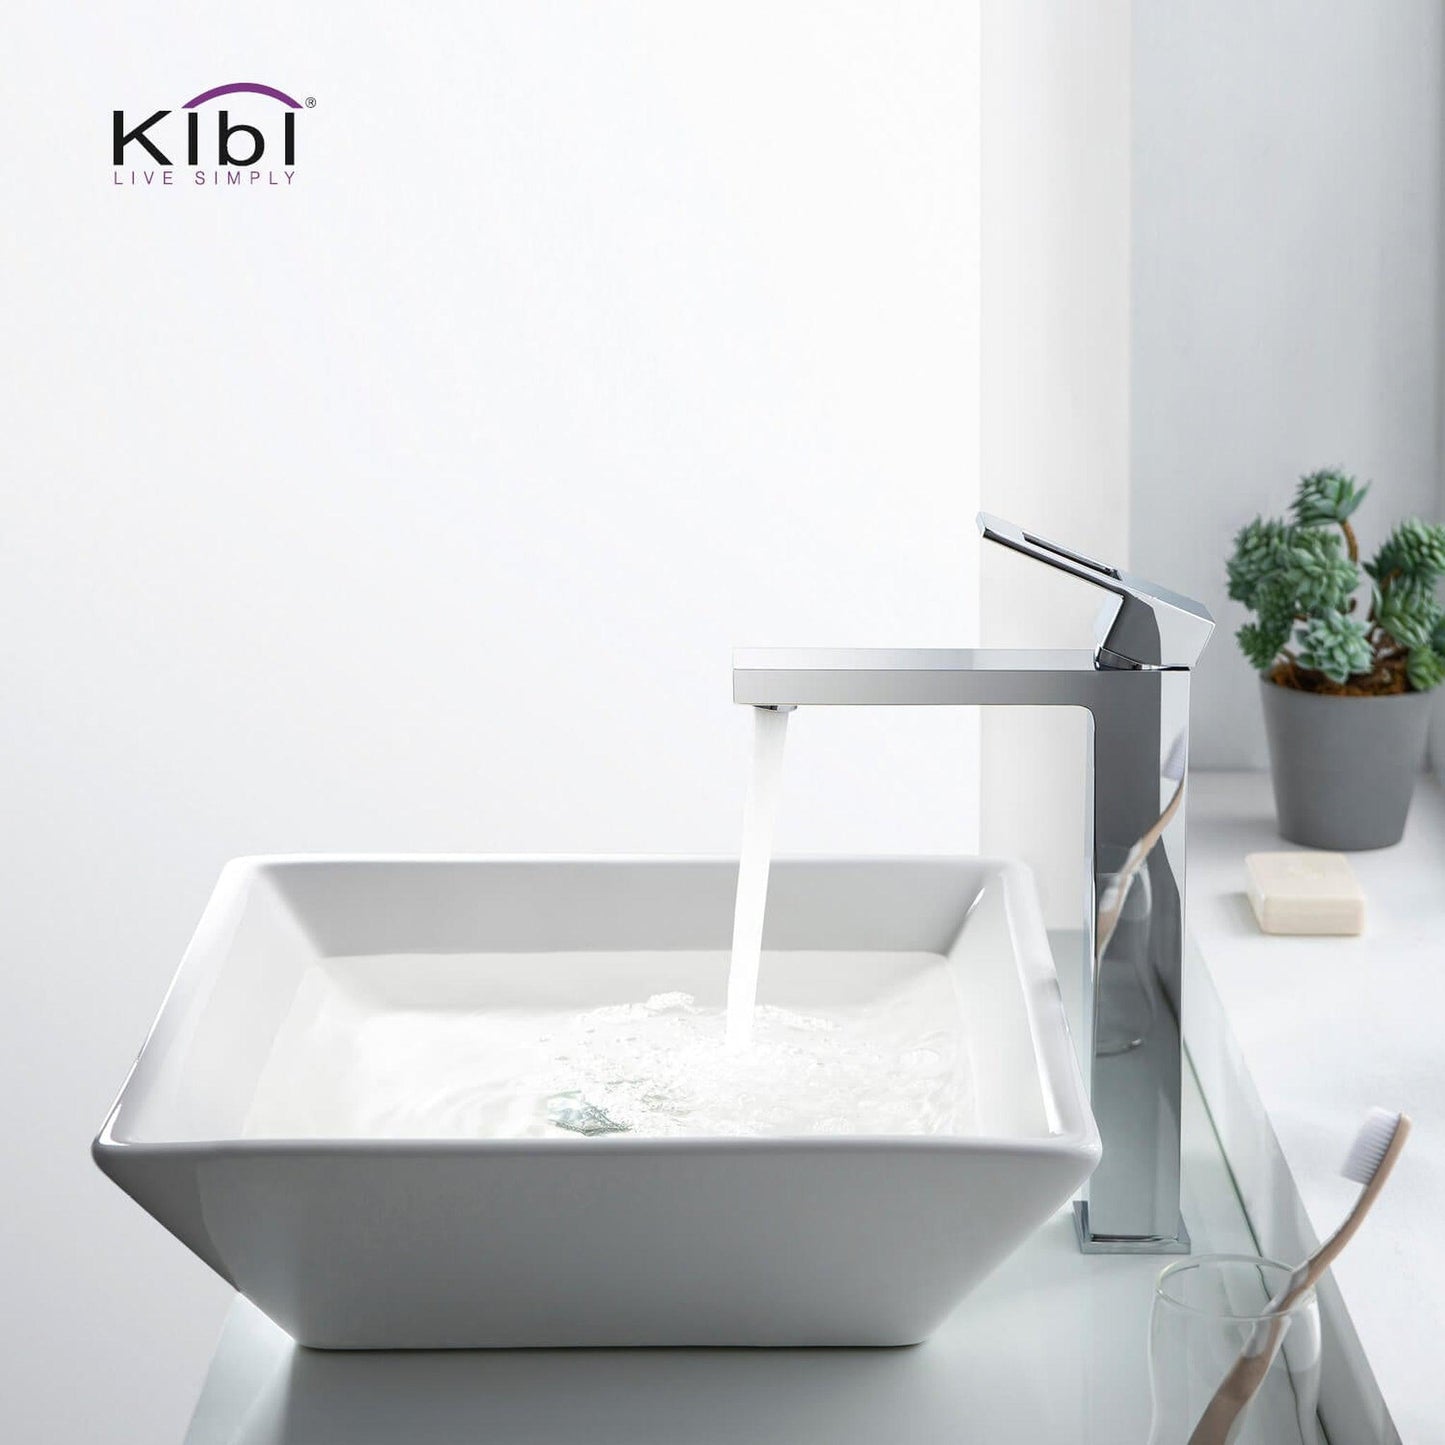 KIBI Cubic Single Handle Chrome Solid Brass Bathroom Vessel Sink Faucet With Pop-Up Drain Stopper Small Cover Without Overflow